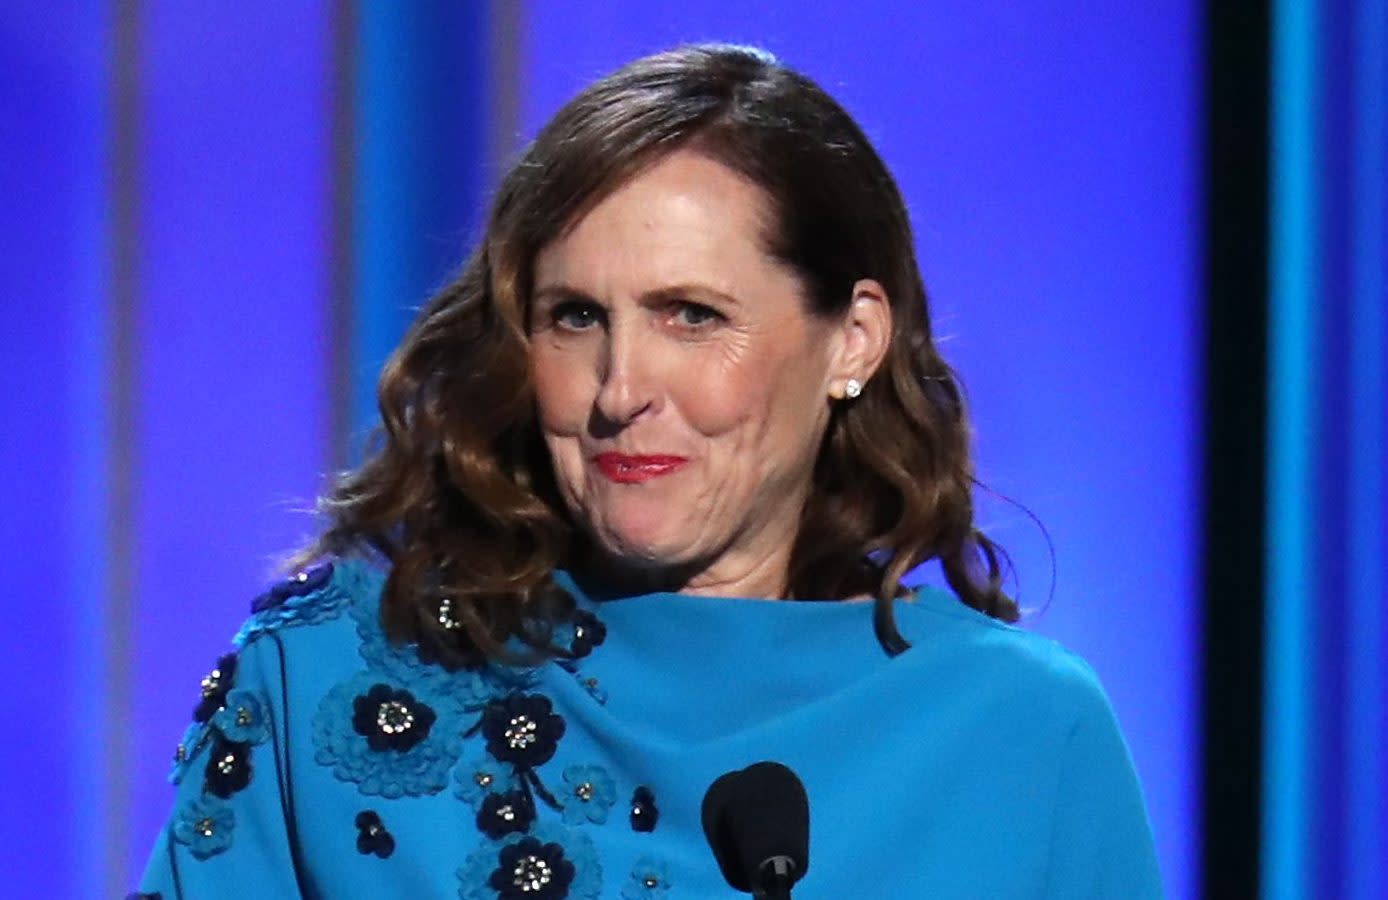 Molly Shannon Beat The Post ‘snl Slump By Being Her Weird And 